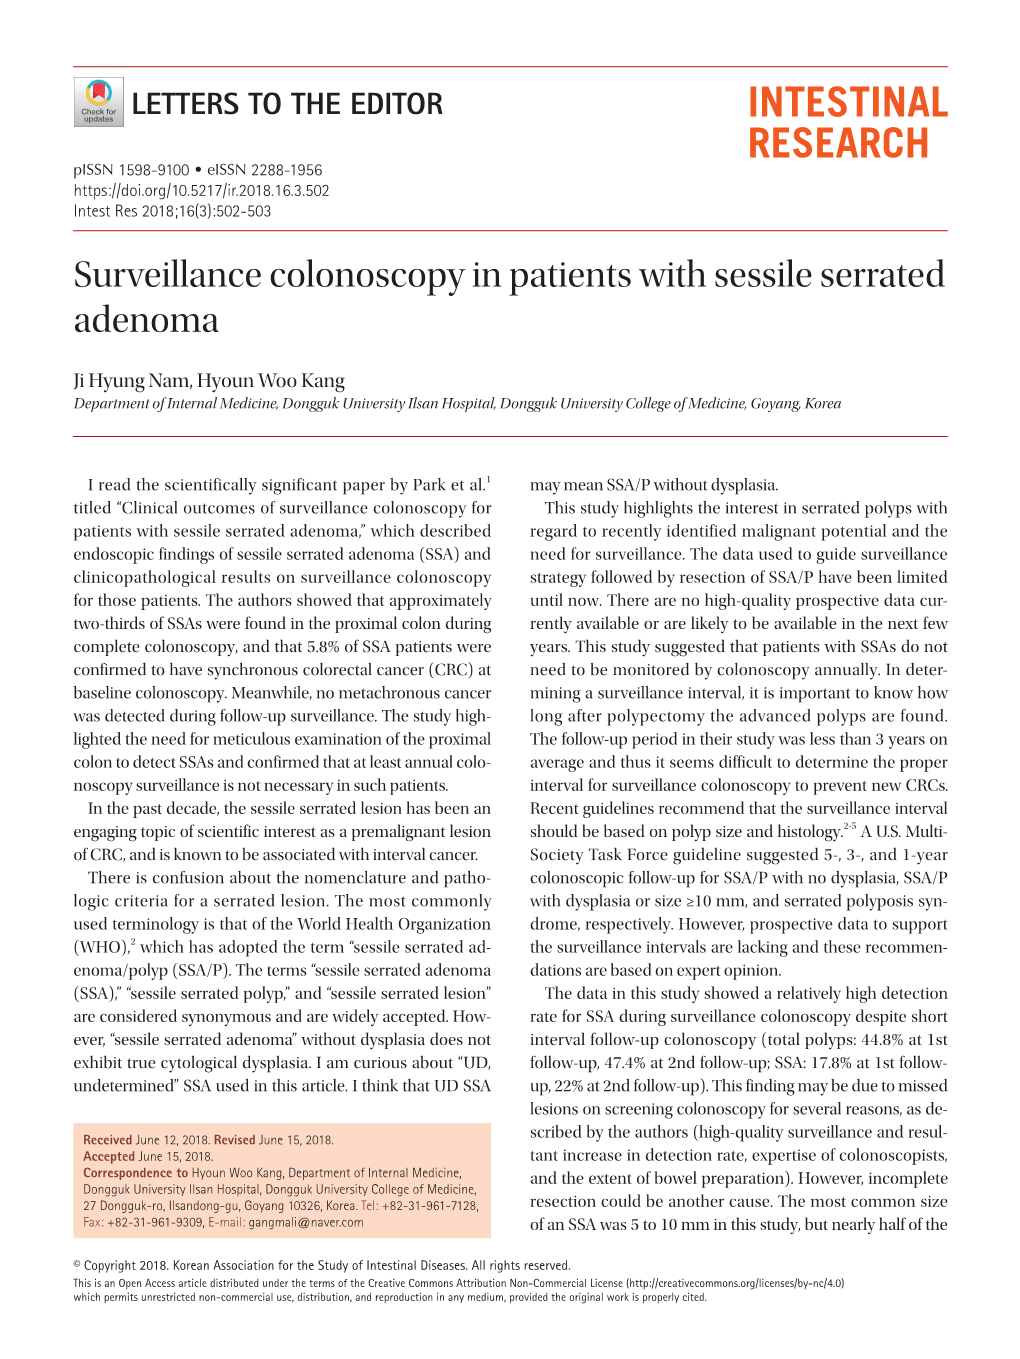 Surveillance Colonoscopy in Patients with Sessile Serrated Adenoma